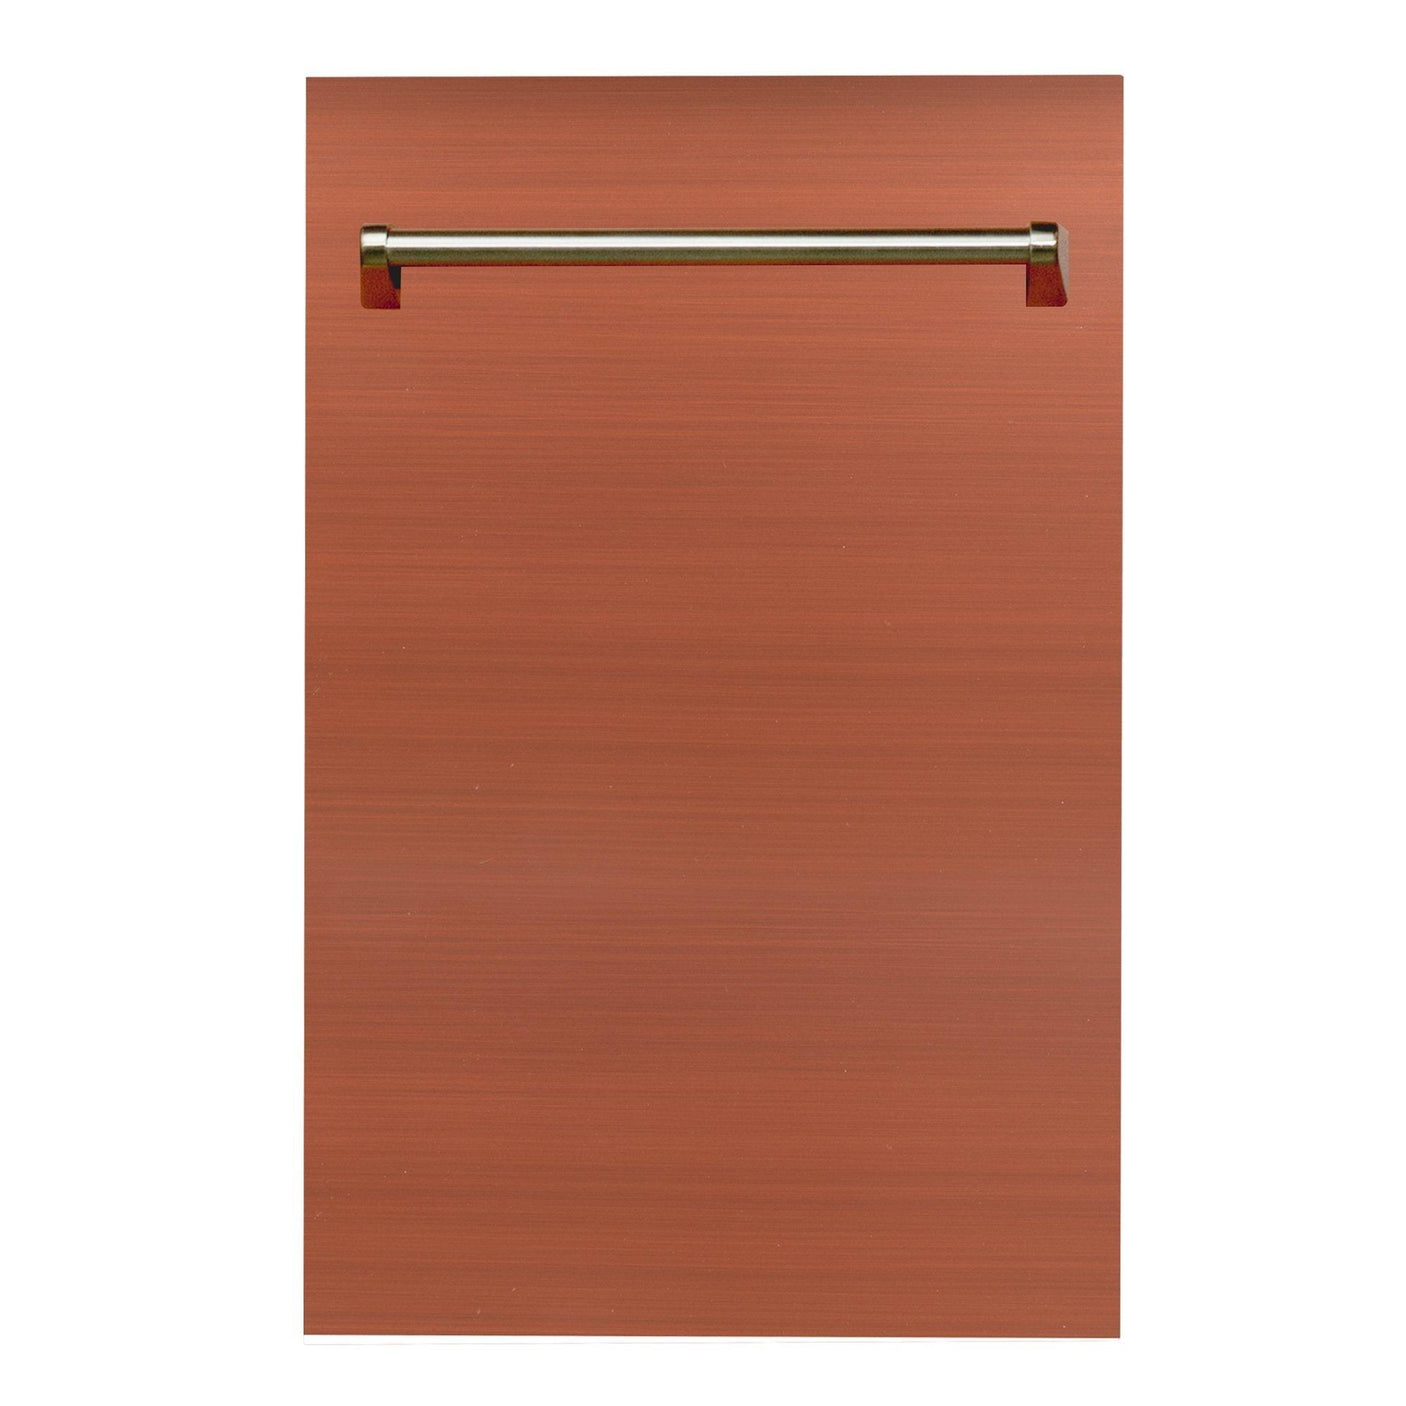 ZLINE 18 in. Dishwasher Panel with Traditional Handle (DP-18) [Color: Oil Rubbed Bronze]